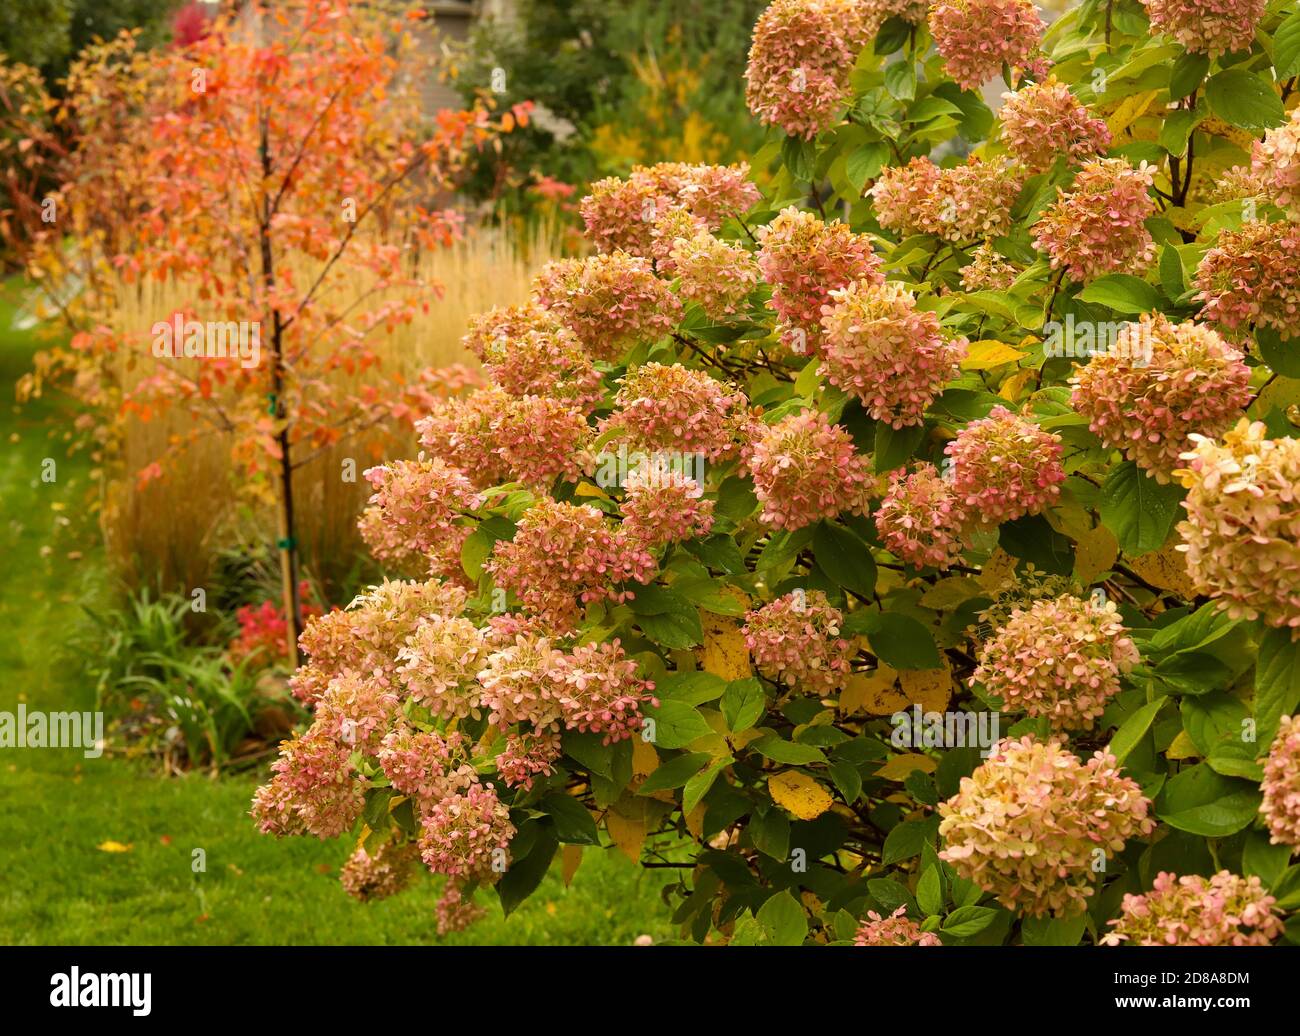 Miscanthus,  Morning Light, Ornamental Grasses and Limelight hydrangeas create a wistful fall escape Stock Photo